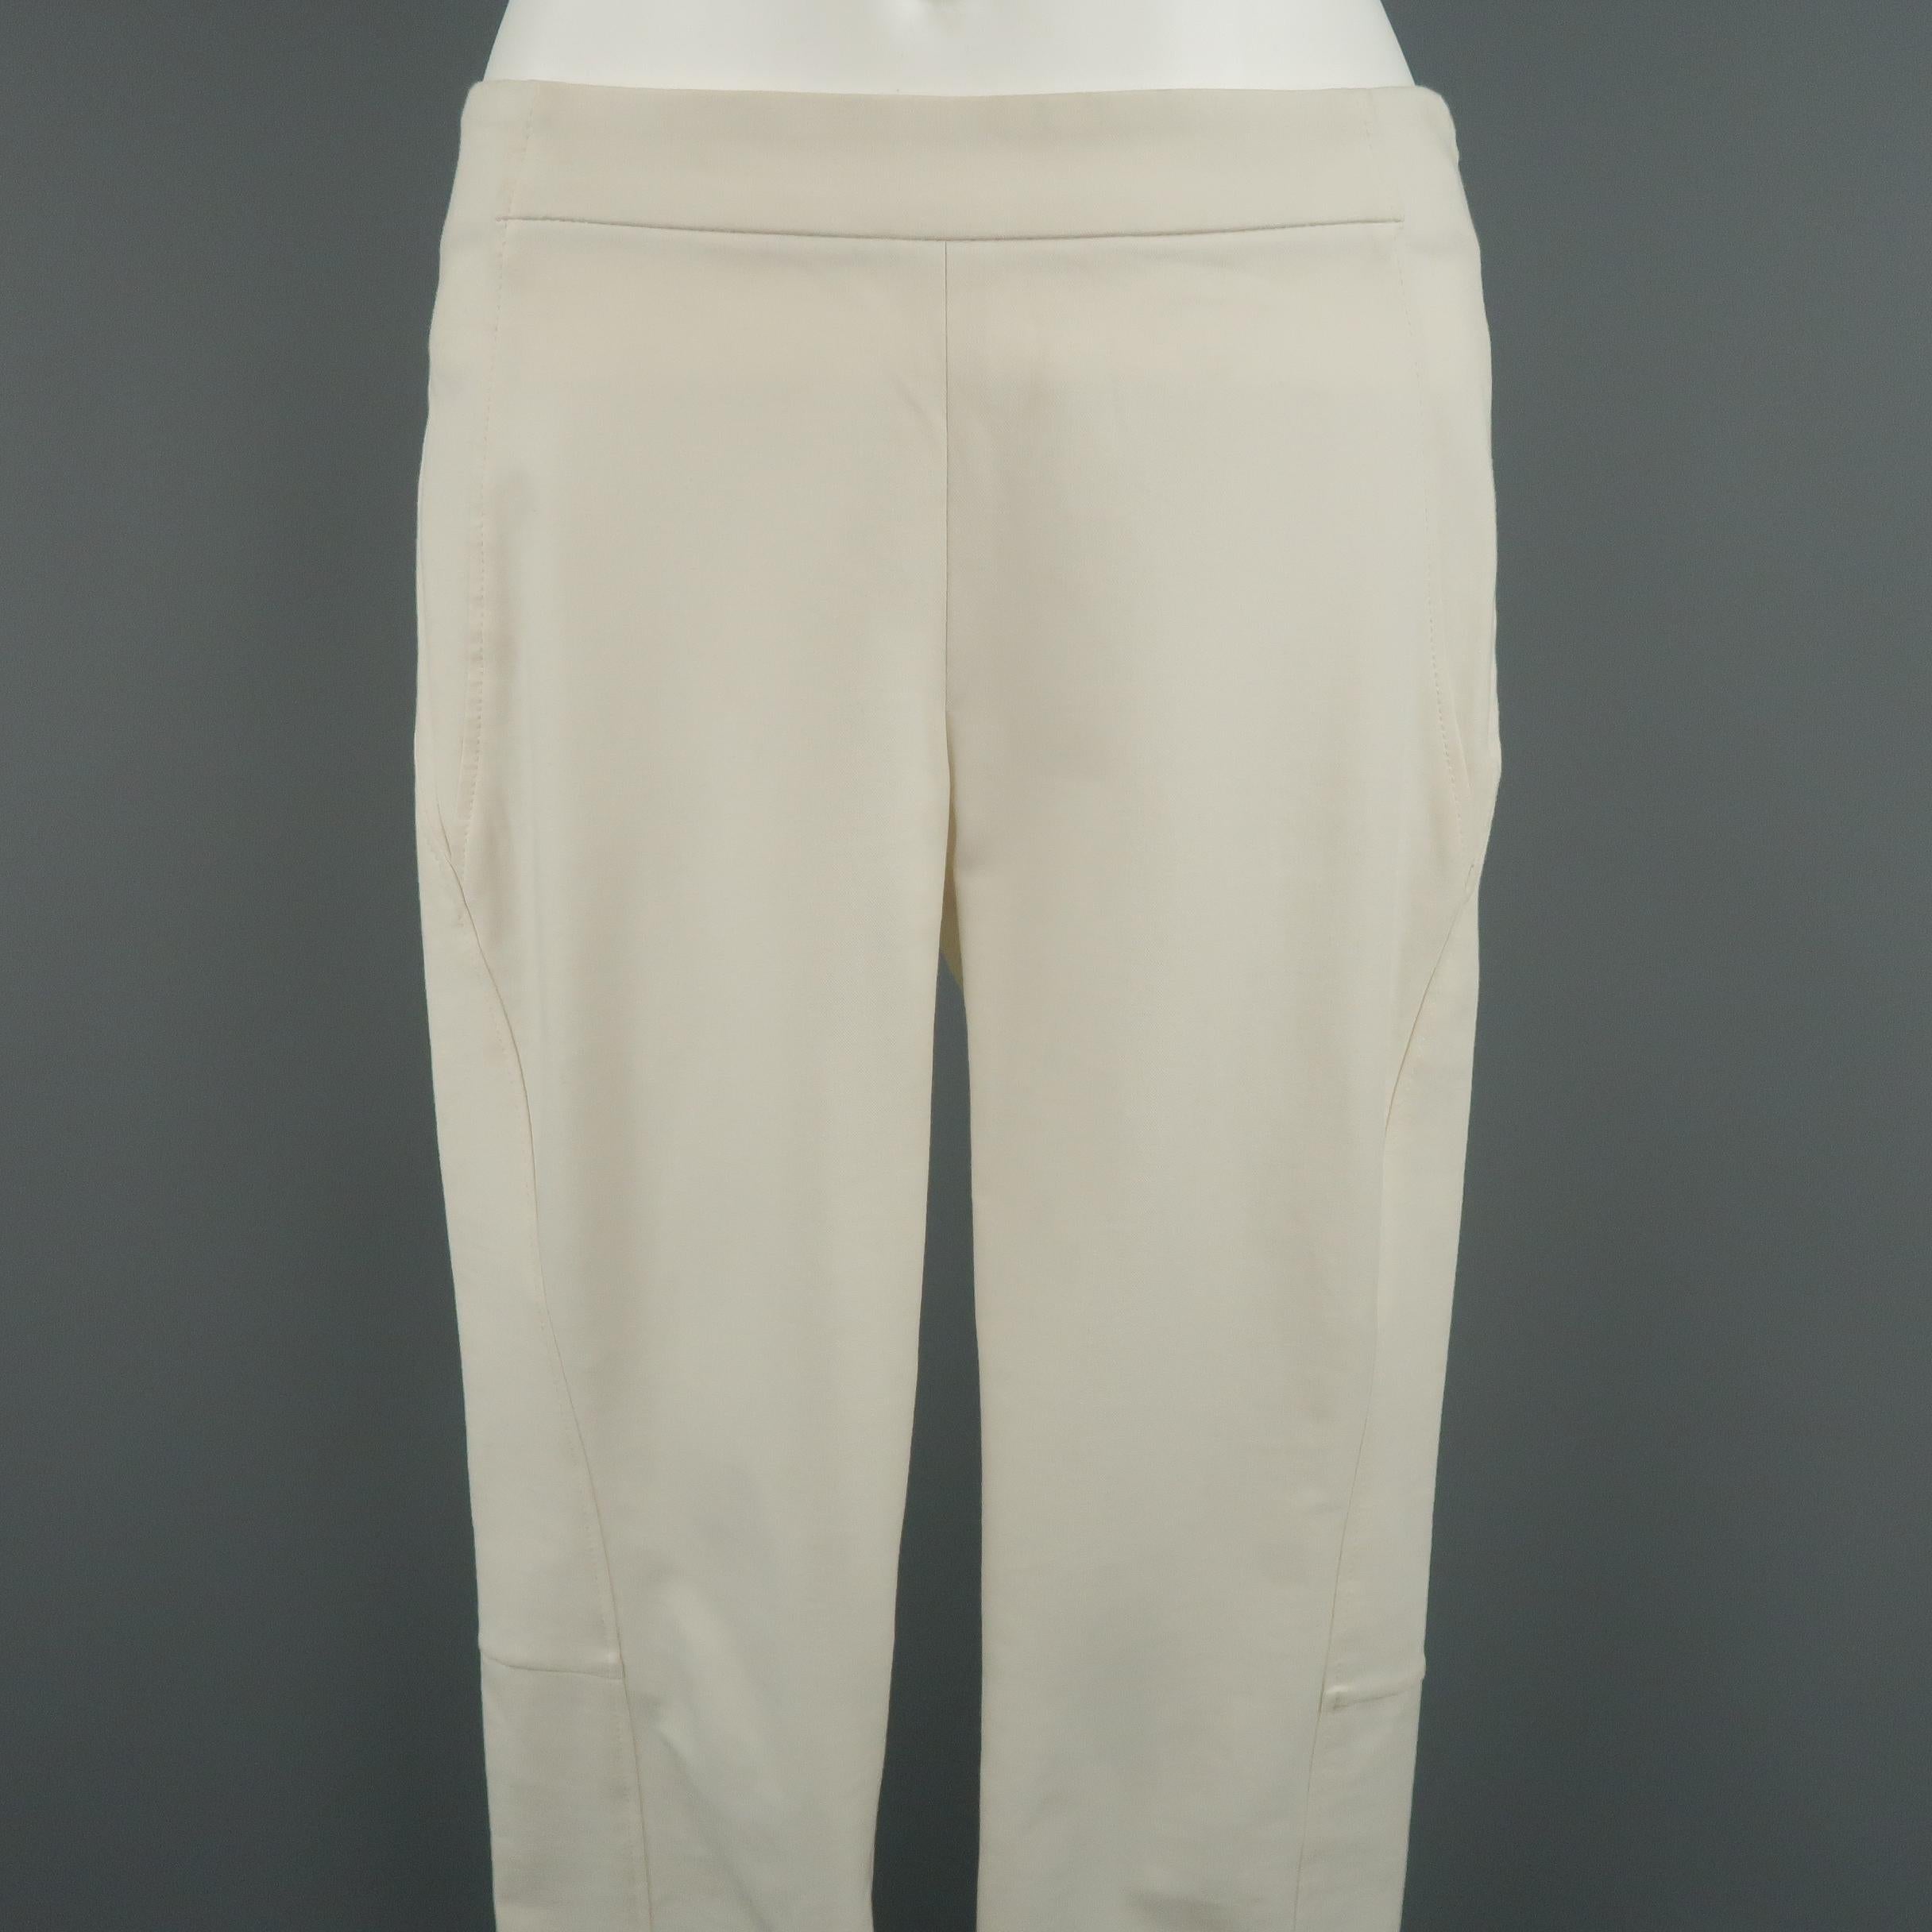 BRUNELLO CUCINELLI legging pants come in off white stretch twill with motorcycle details.  Made in Italy.
 
Very Good Pre-Owned Condition.
Marked: 4
 
Measurements:
 
Waist: 30 in.
Rise: 8 in.
Inseam:  29 in.